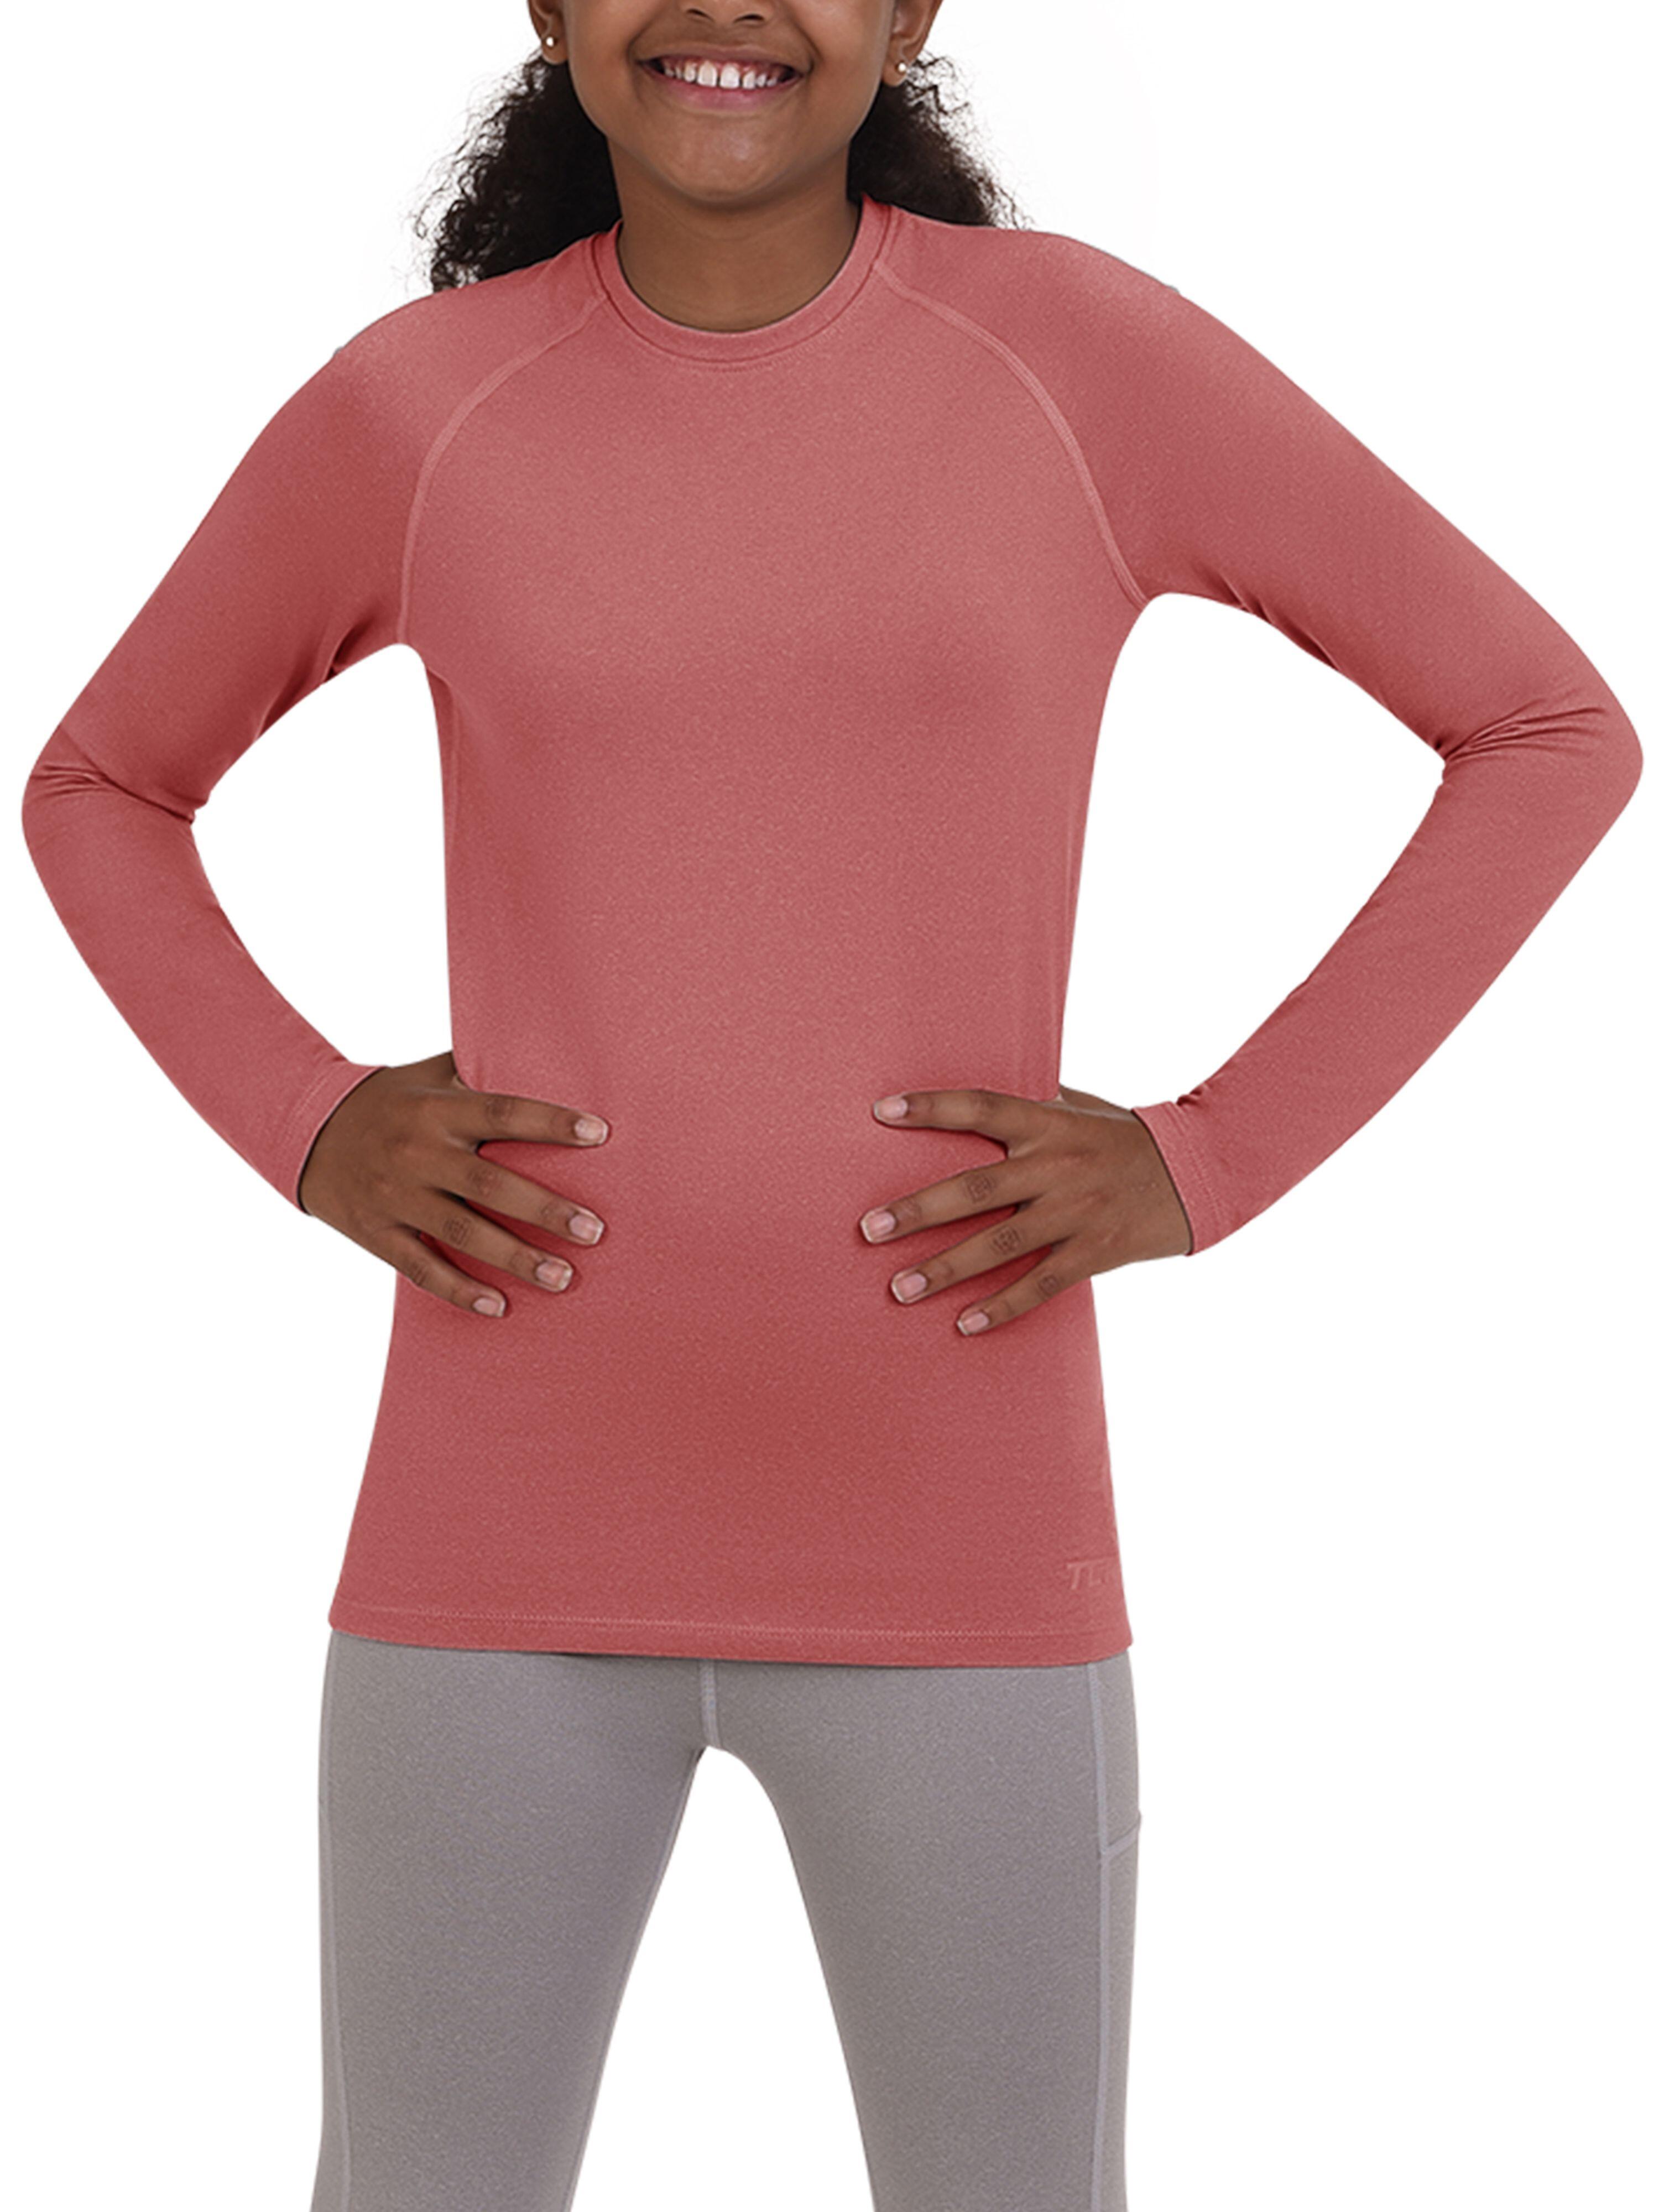 Girls' Super Thermal Base Layer Top - Dusty Rose Marl 2/5